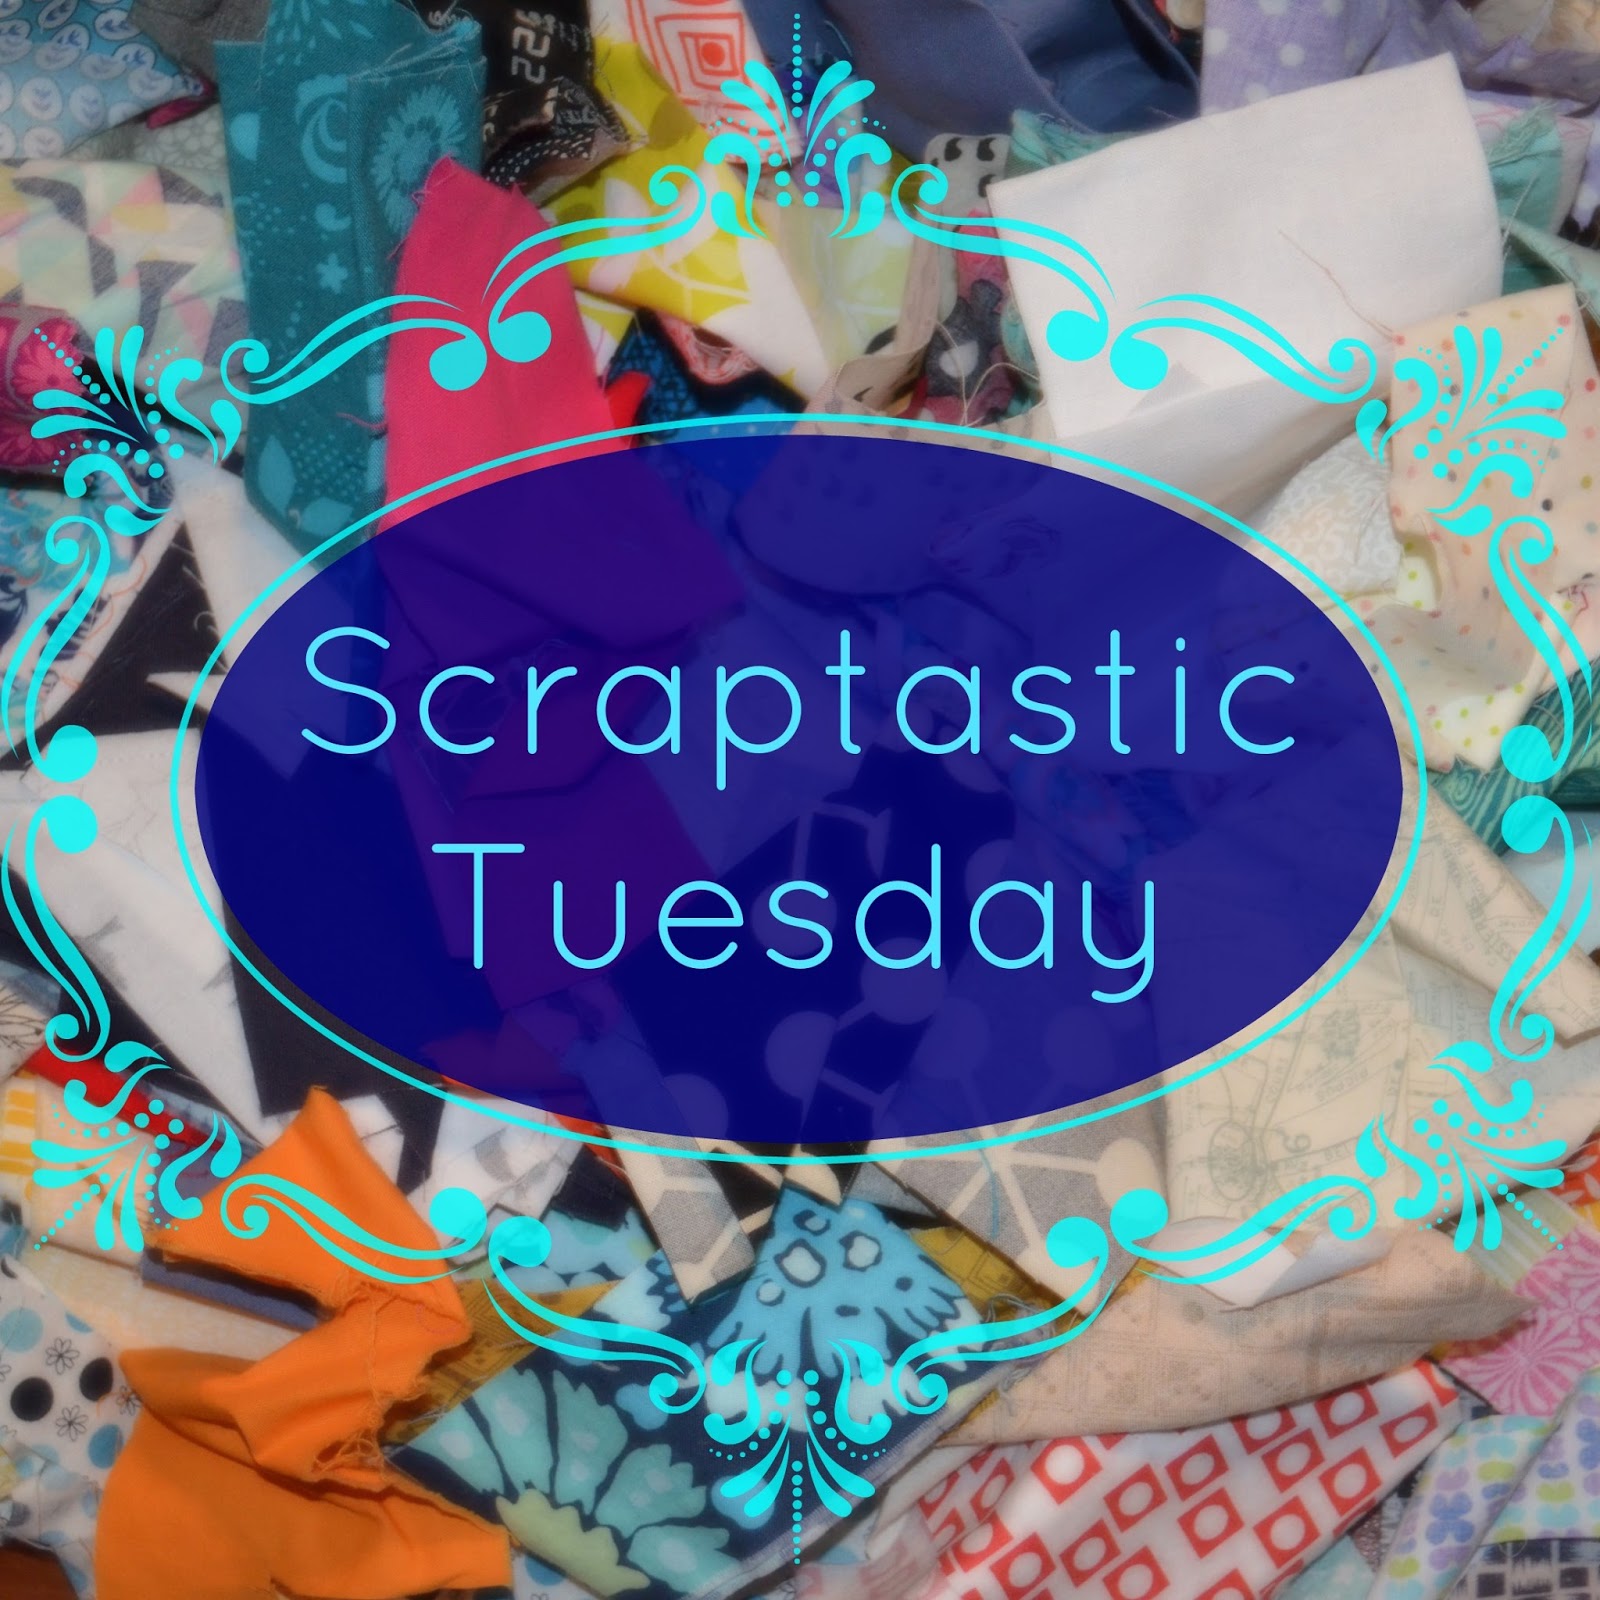 http://www.shecanquilt.ca/2014/10/scraptastic-tuesday-monthly-linkup.html